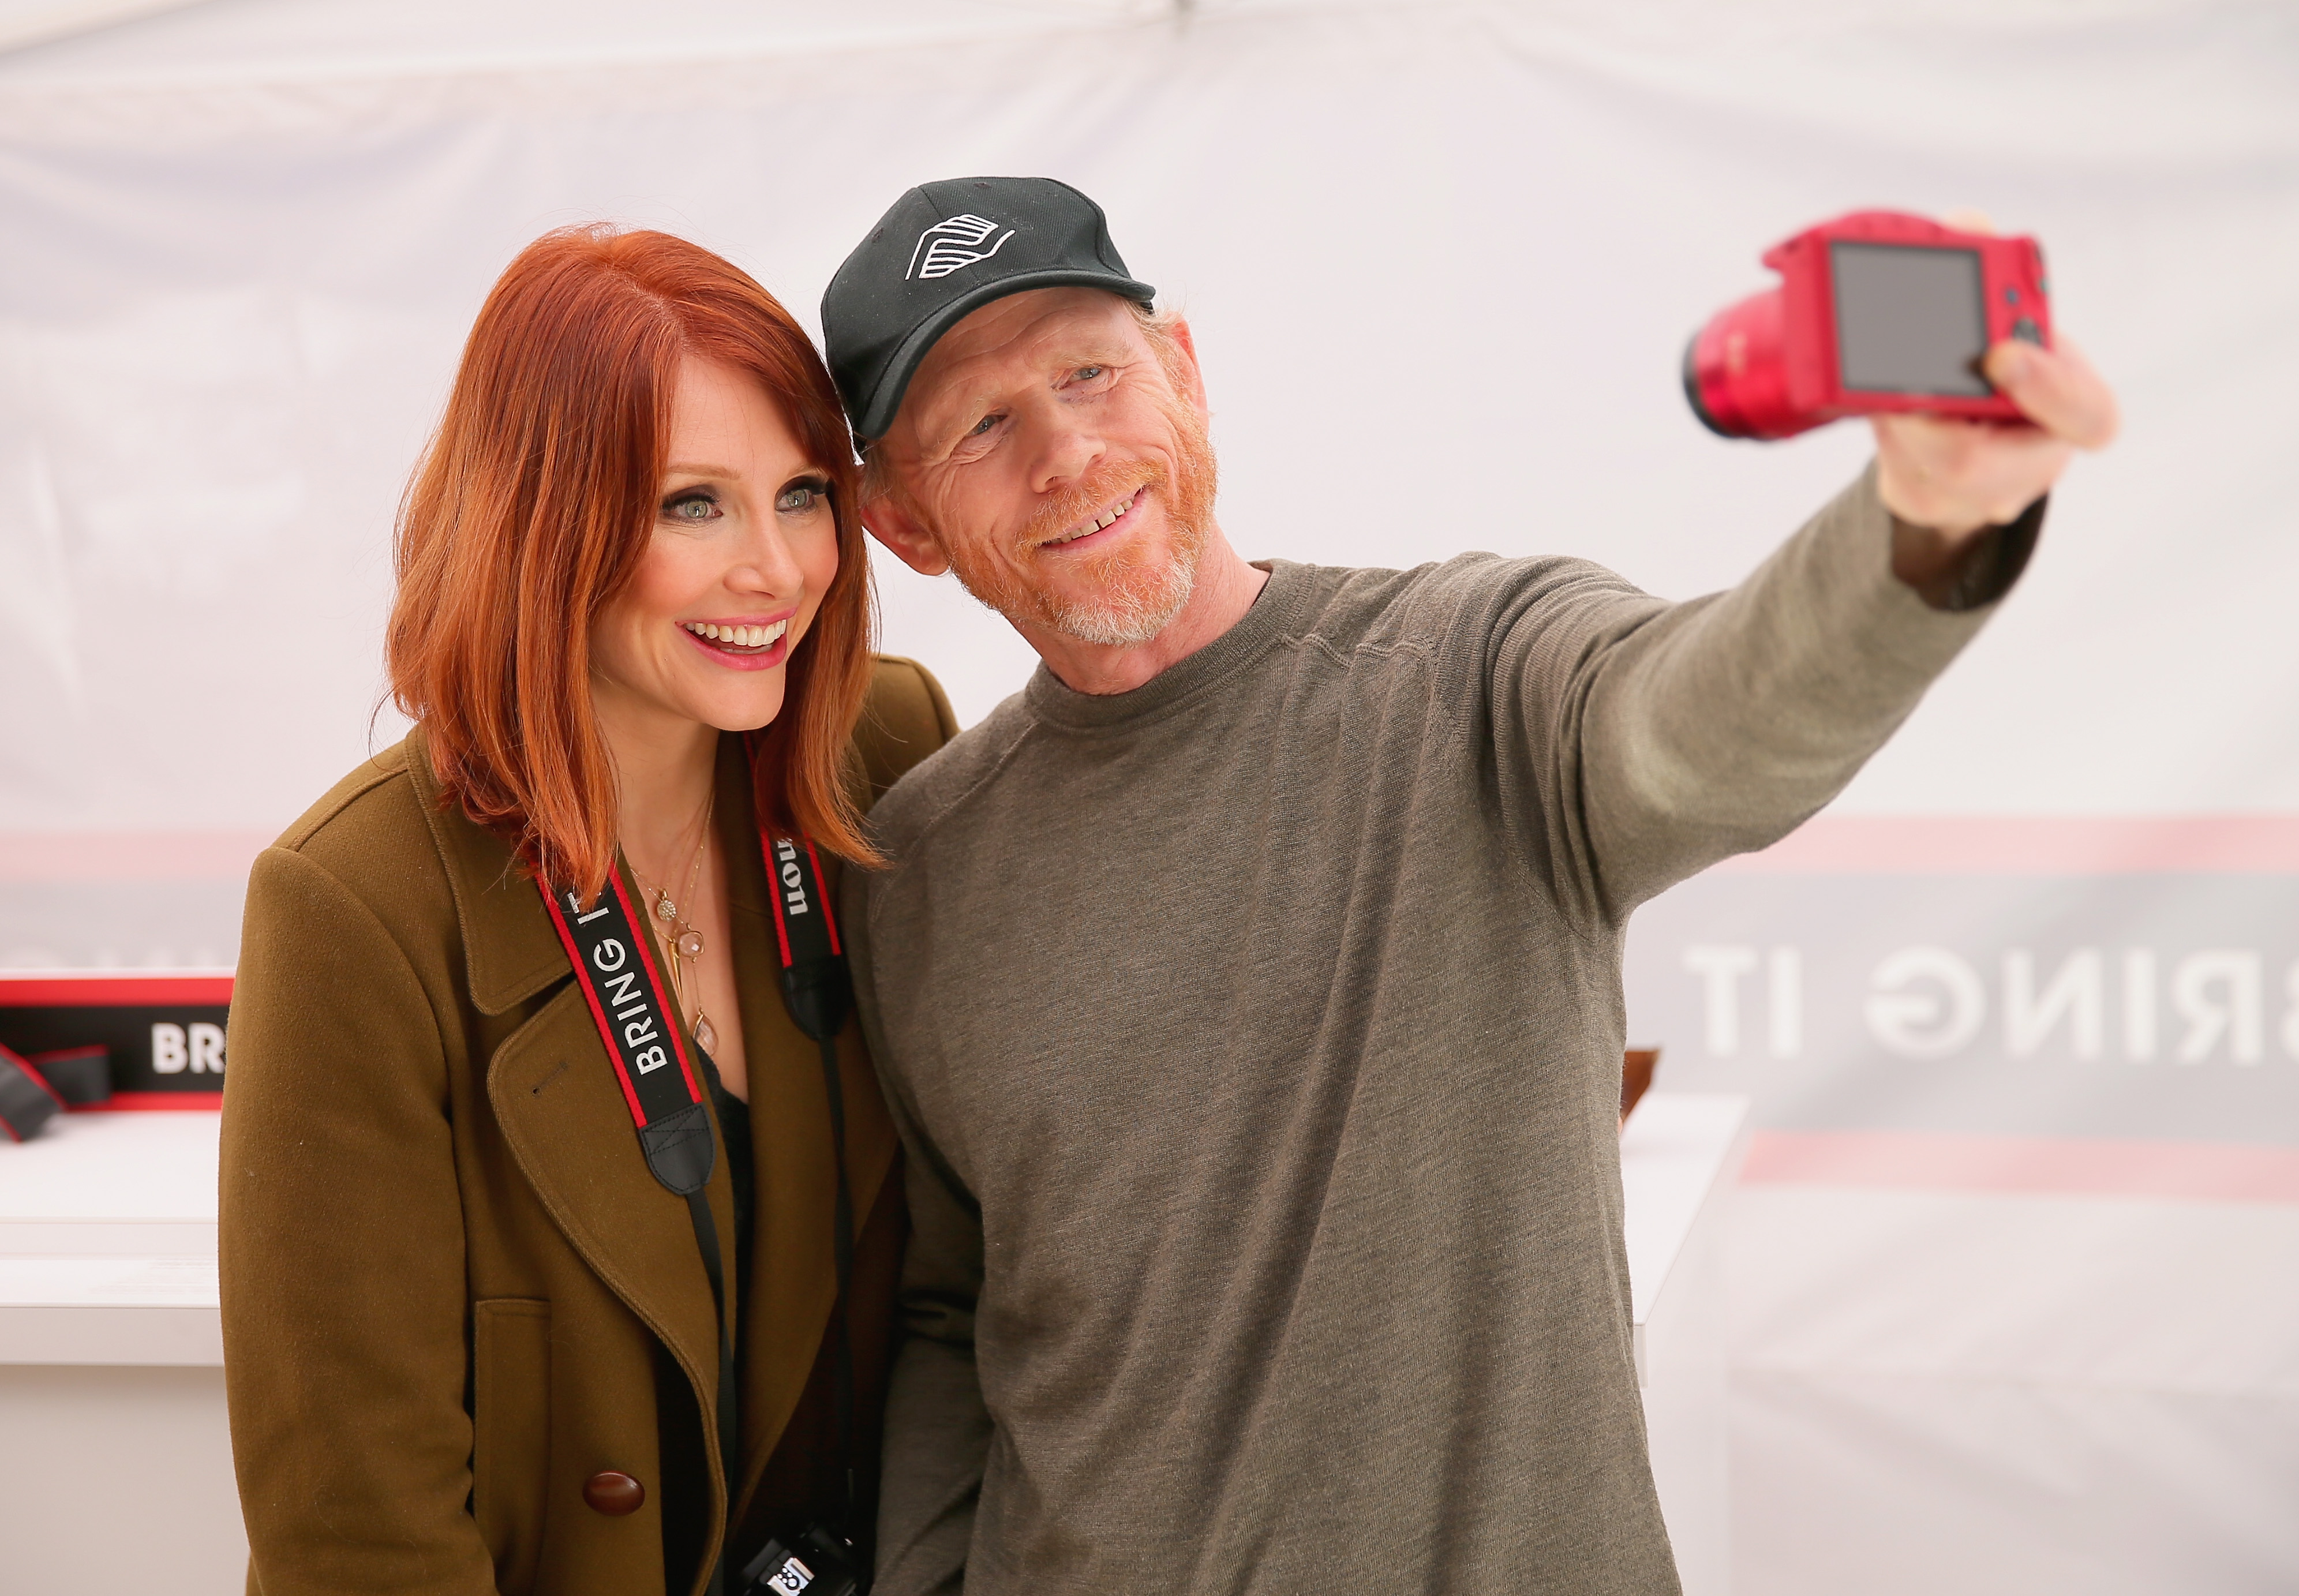 Ron Howard, right, with daughter Bryce Dallas Howard